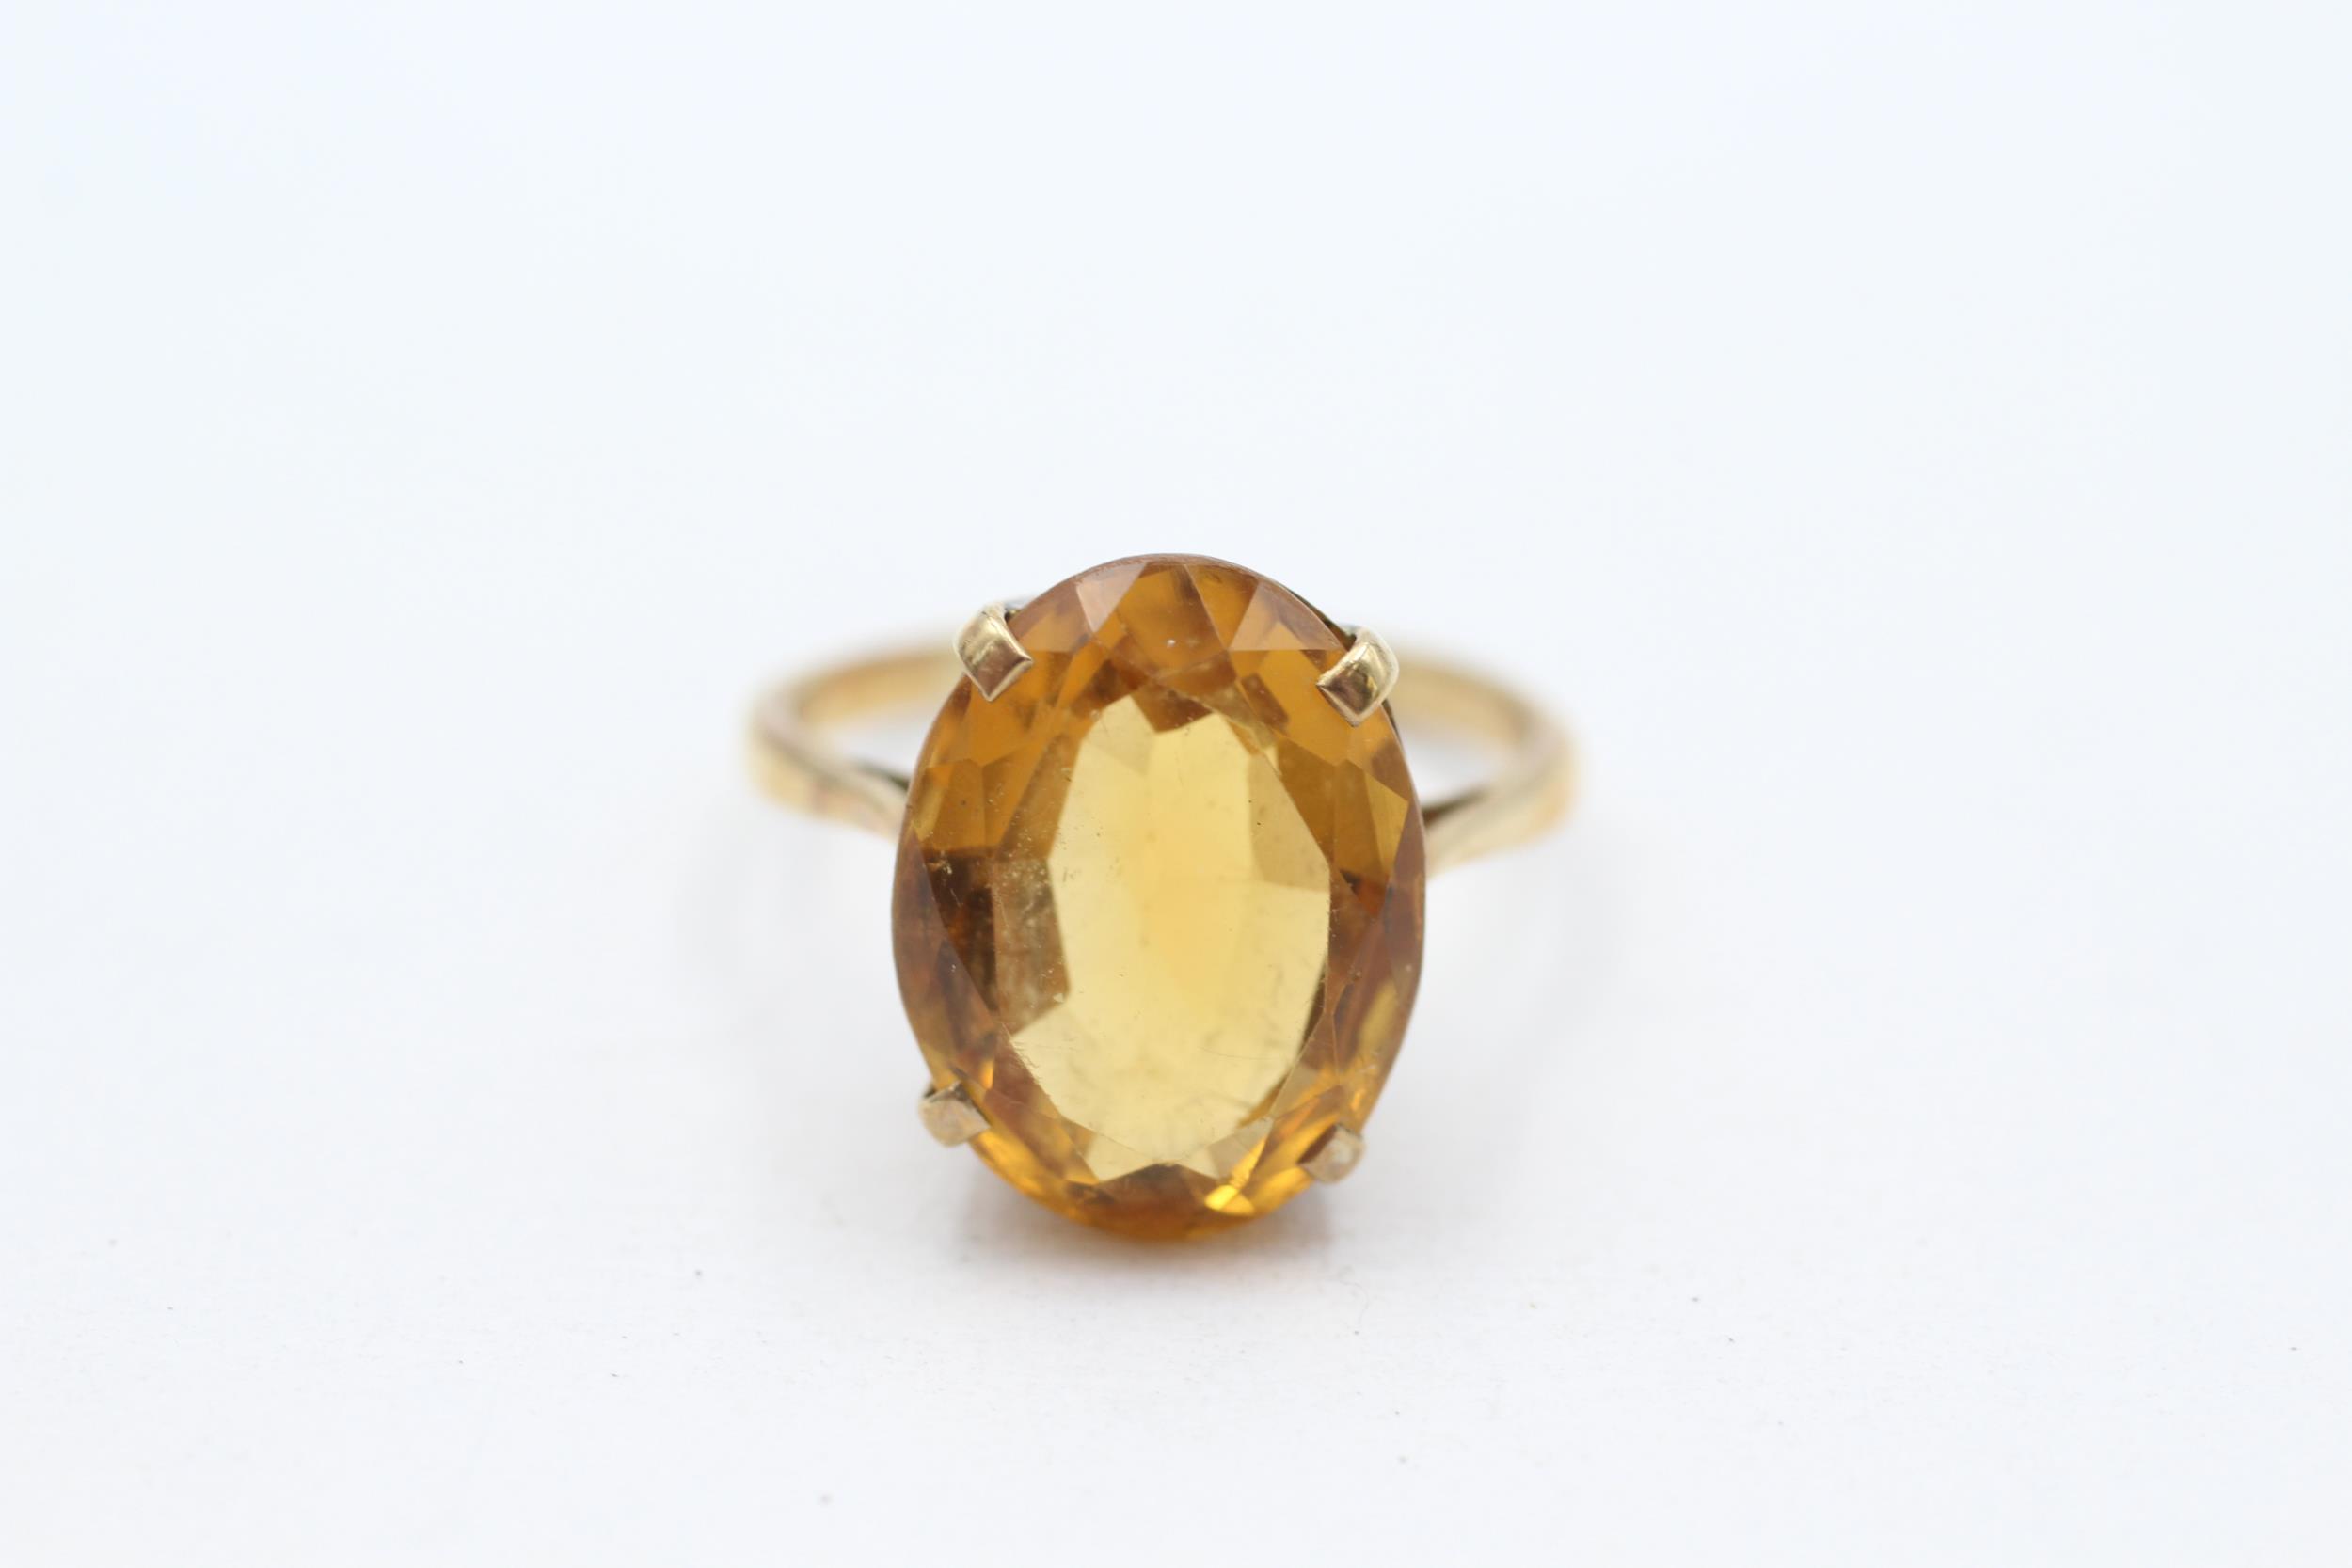 9ct gold oval citrine single stone ring Size L - 3.3 g